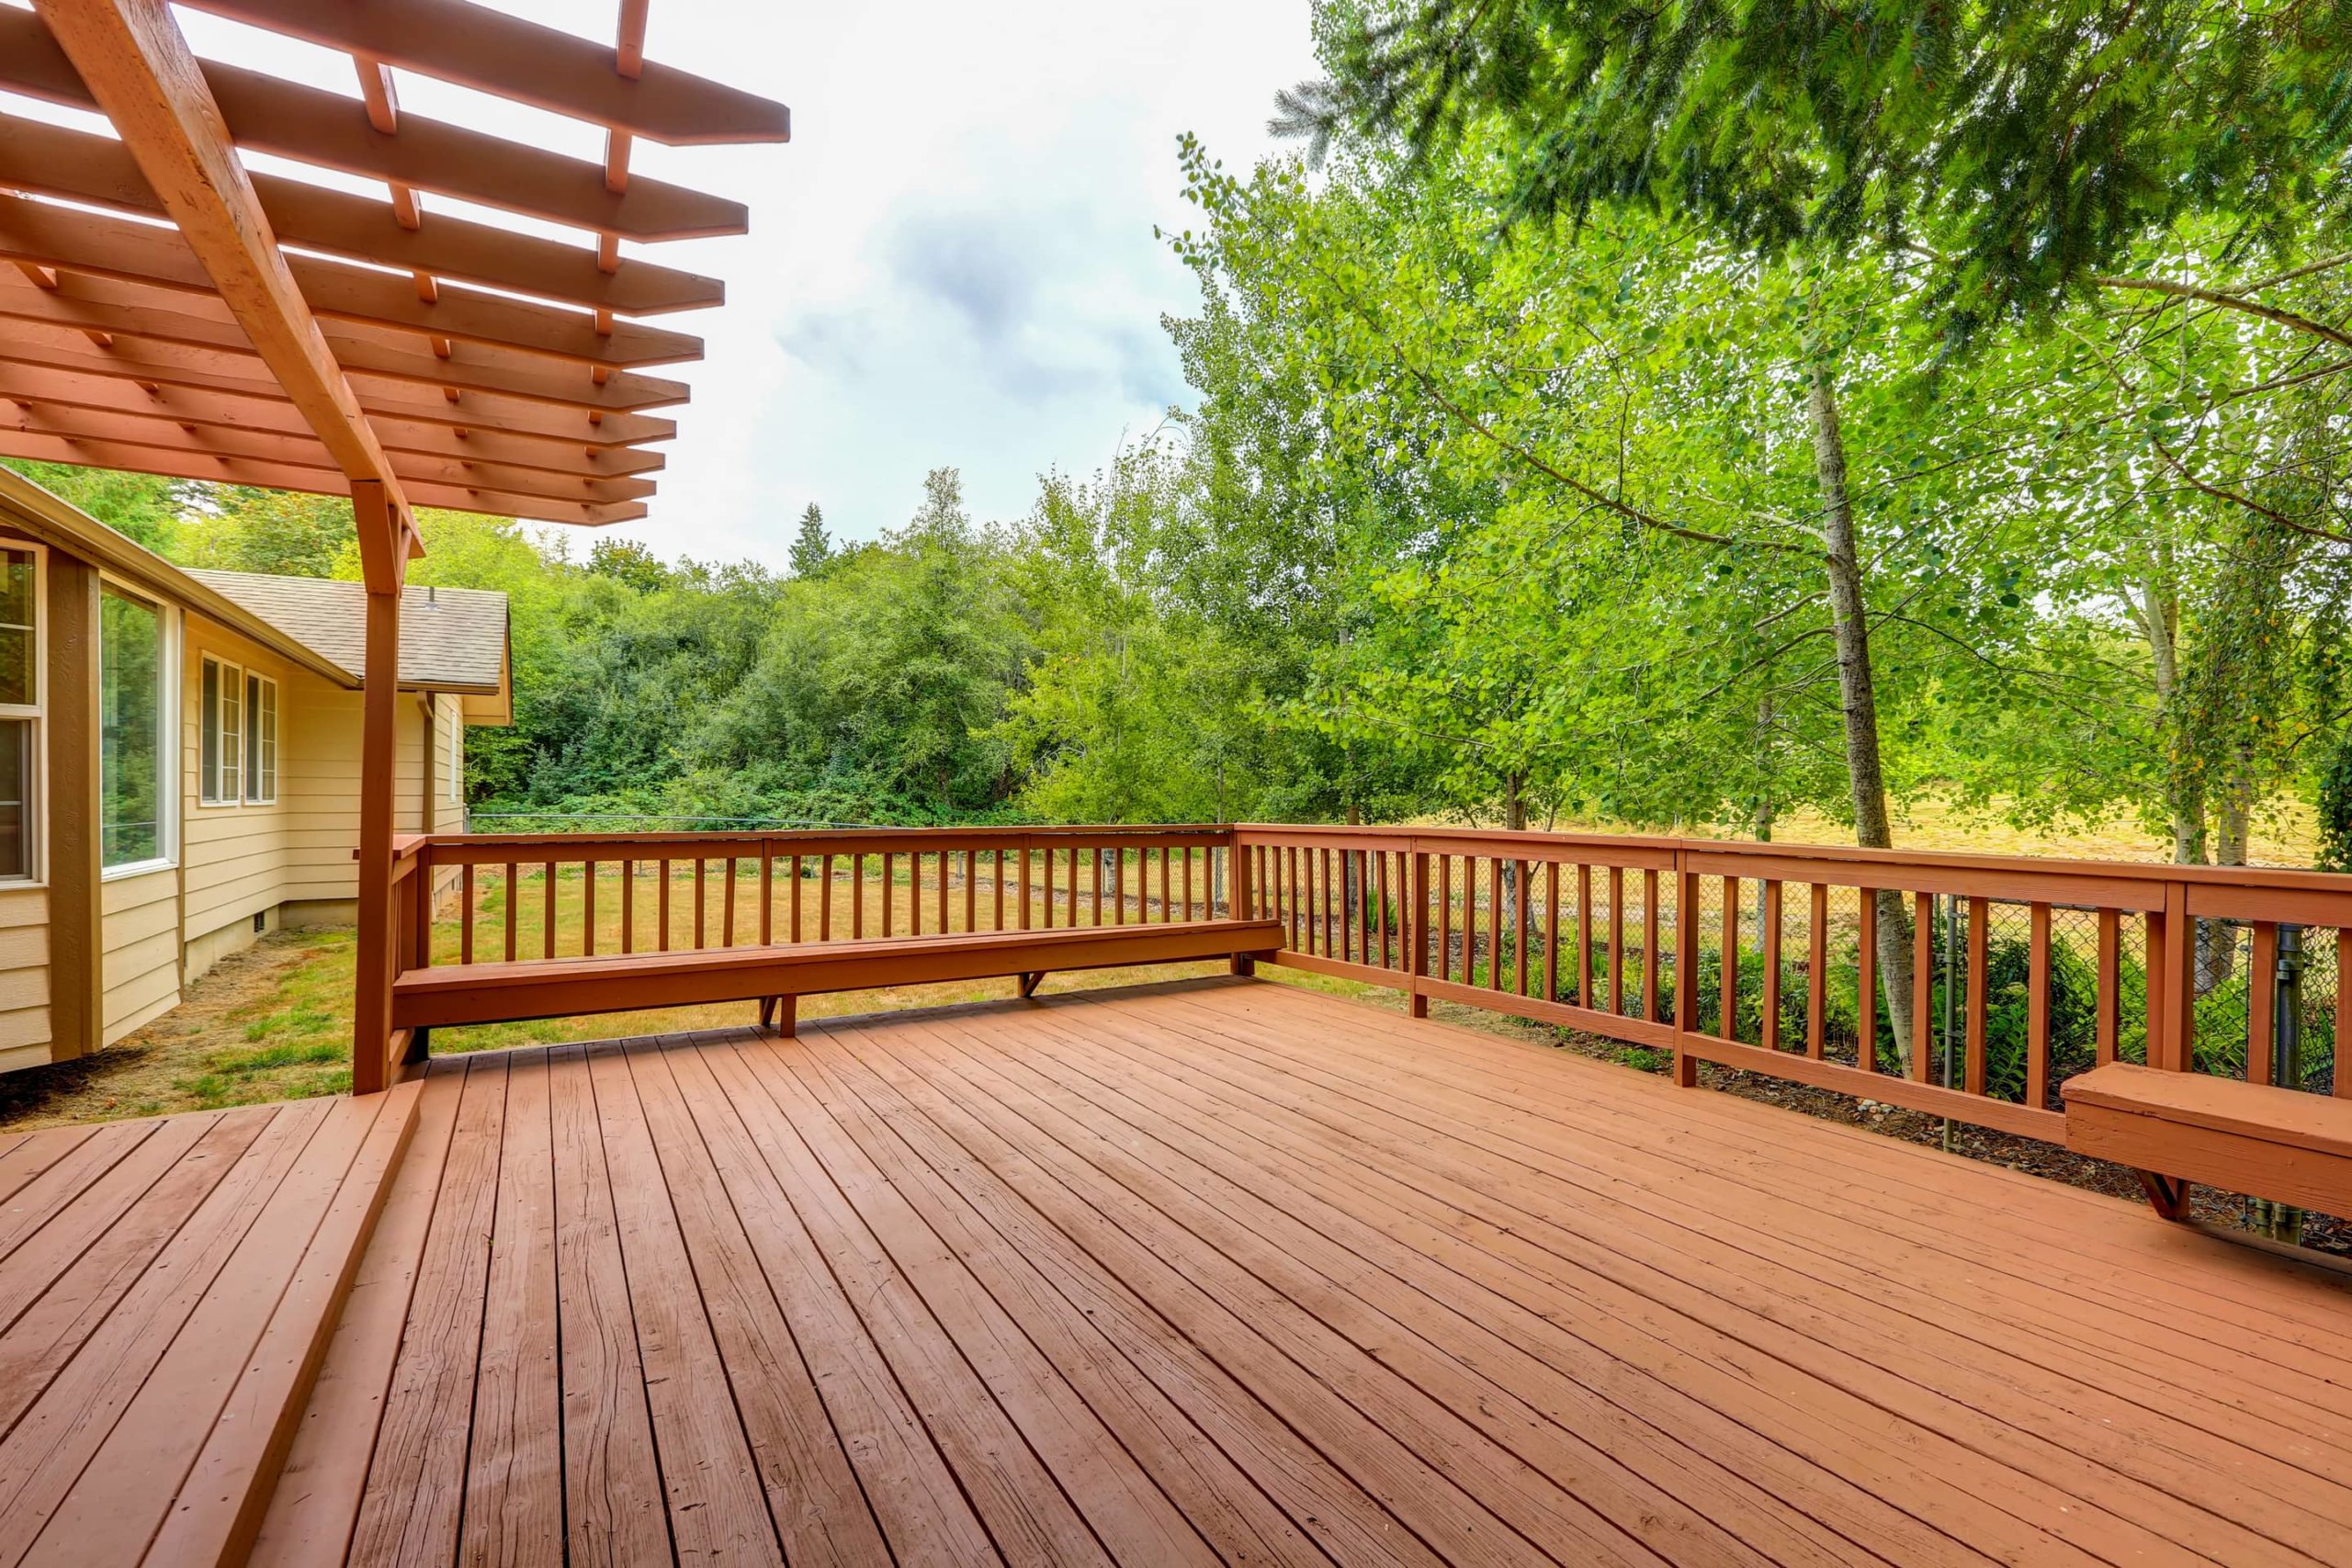 This image shows a beautifully crafted large wooden deck and pergola.